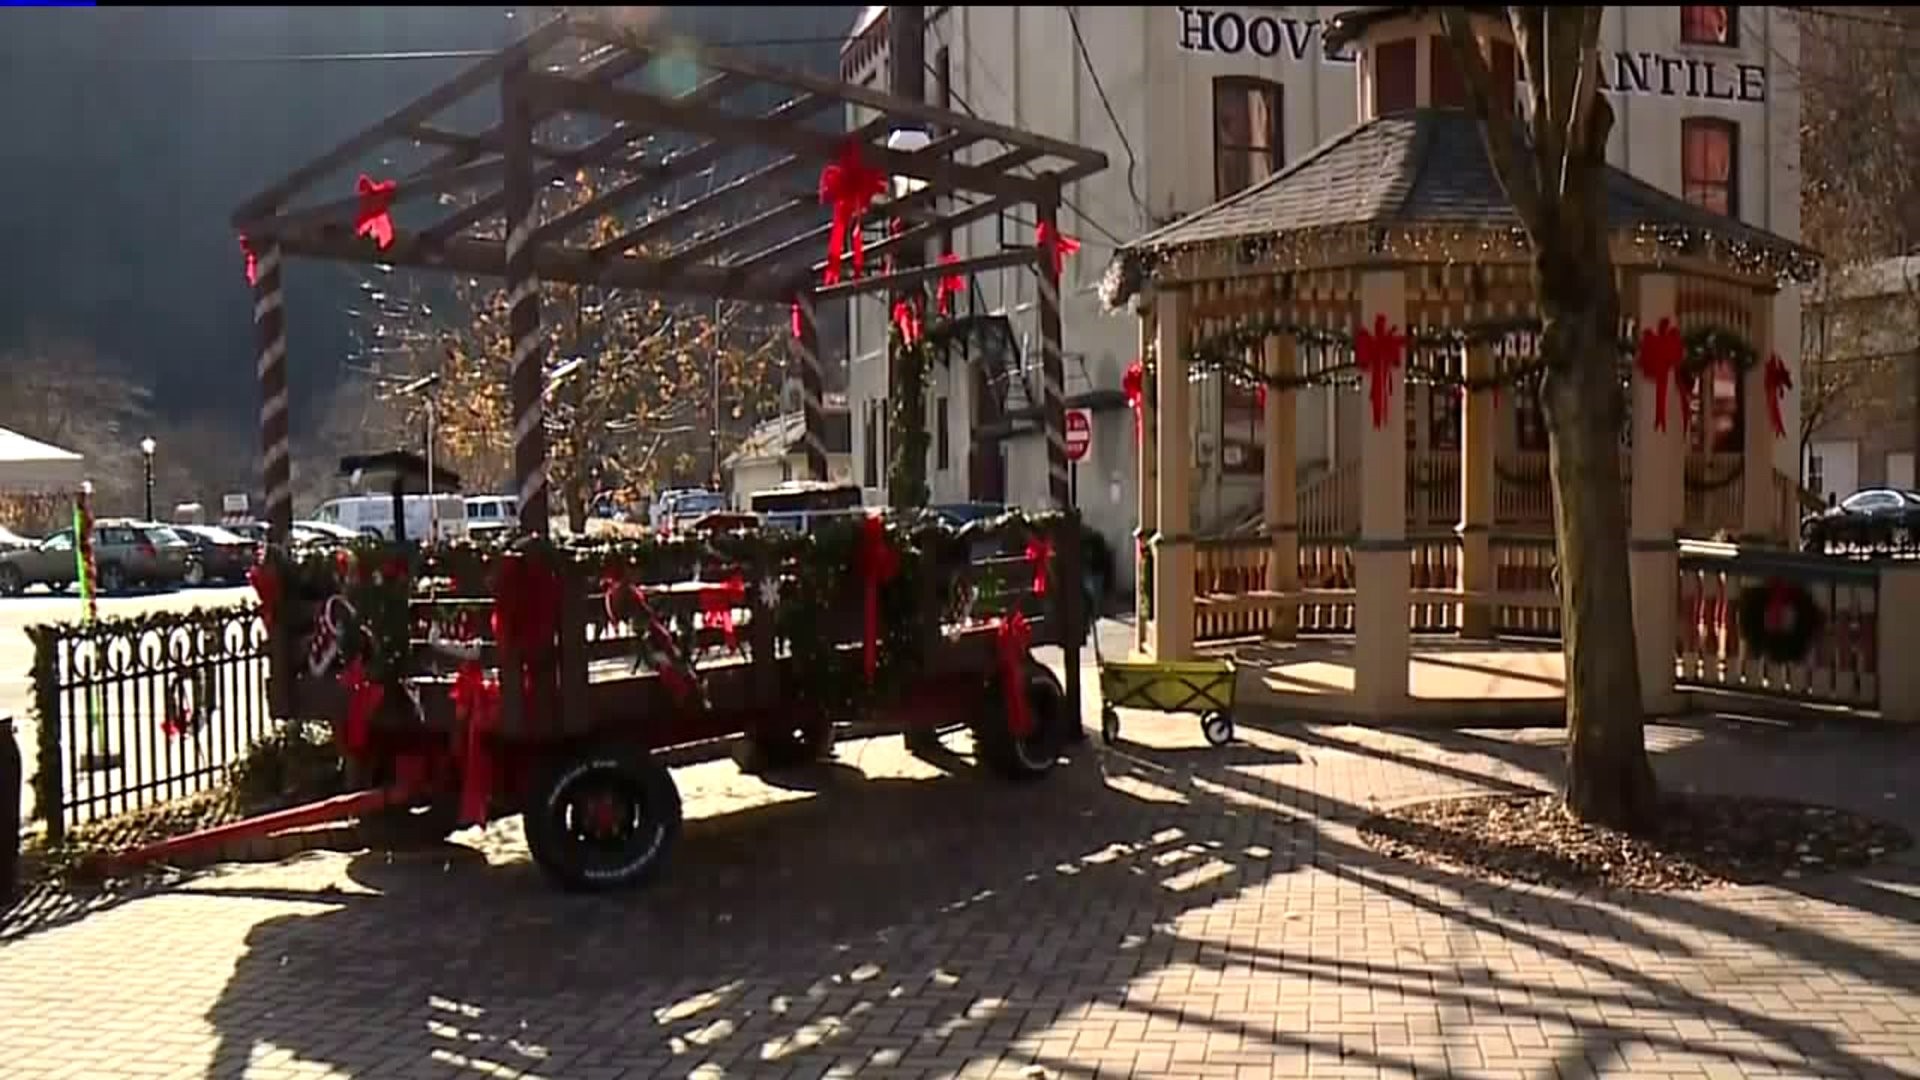 Decorating for the Holidays in Carbon County